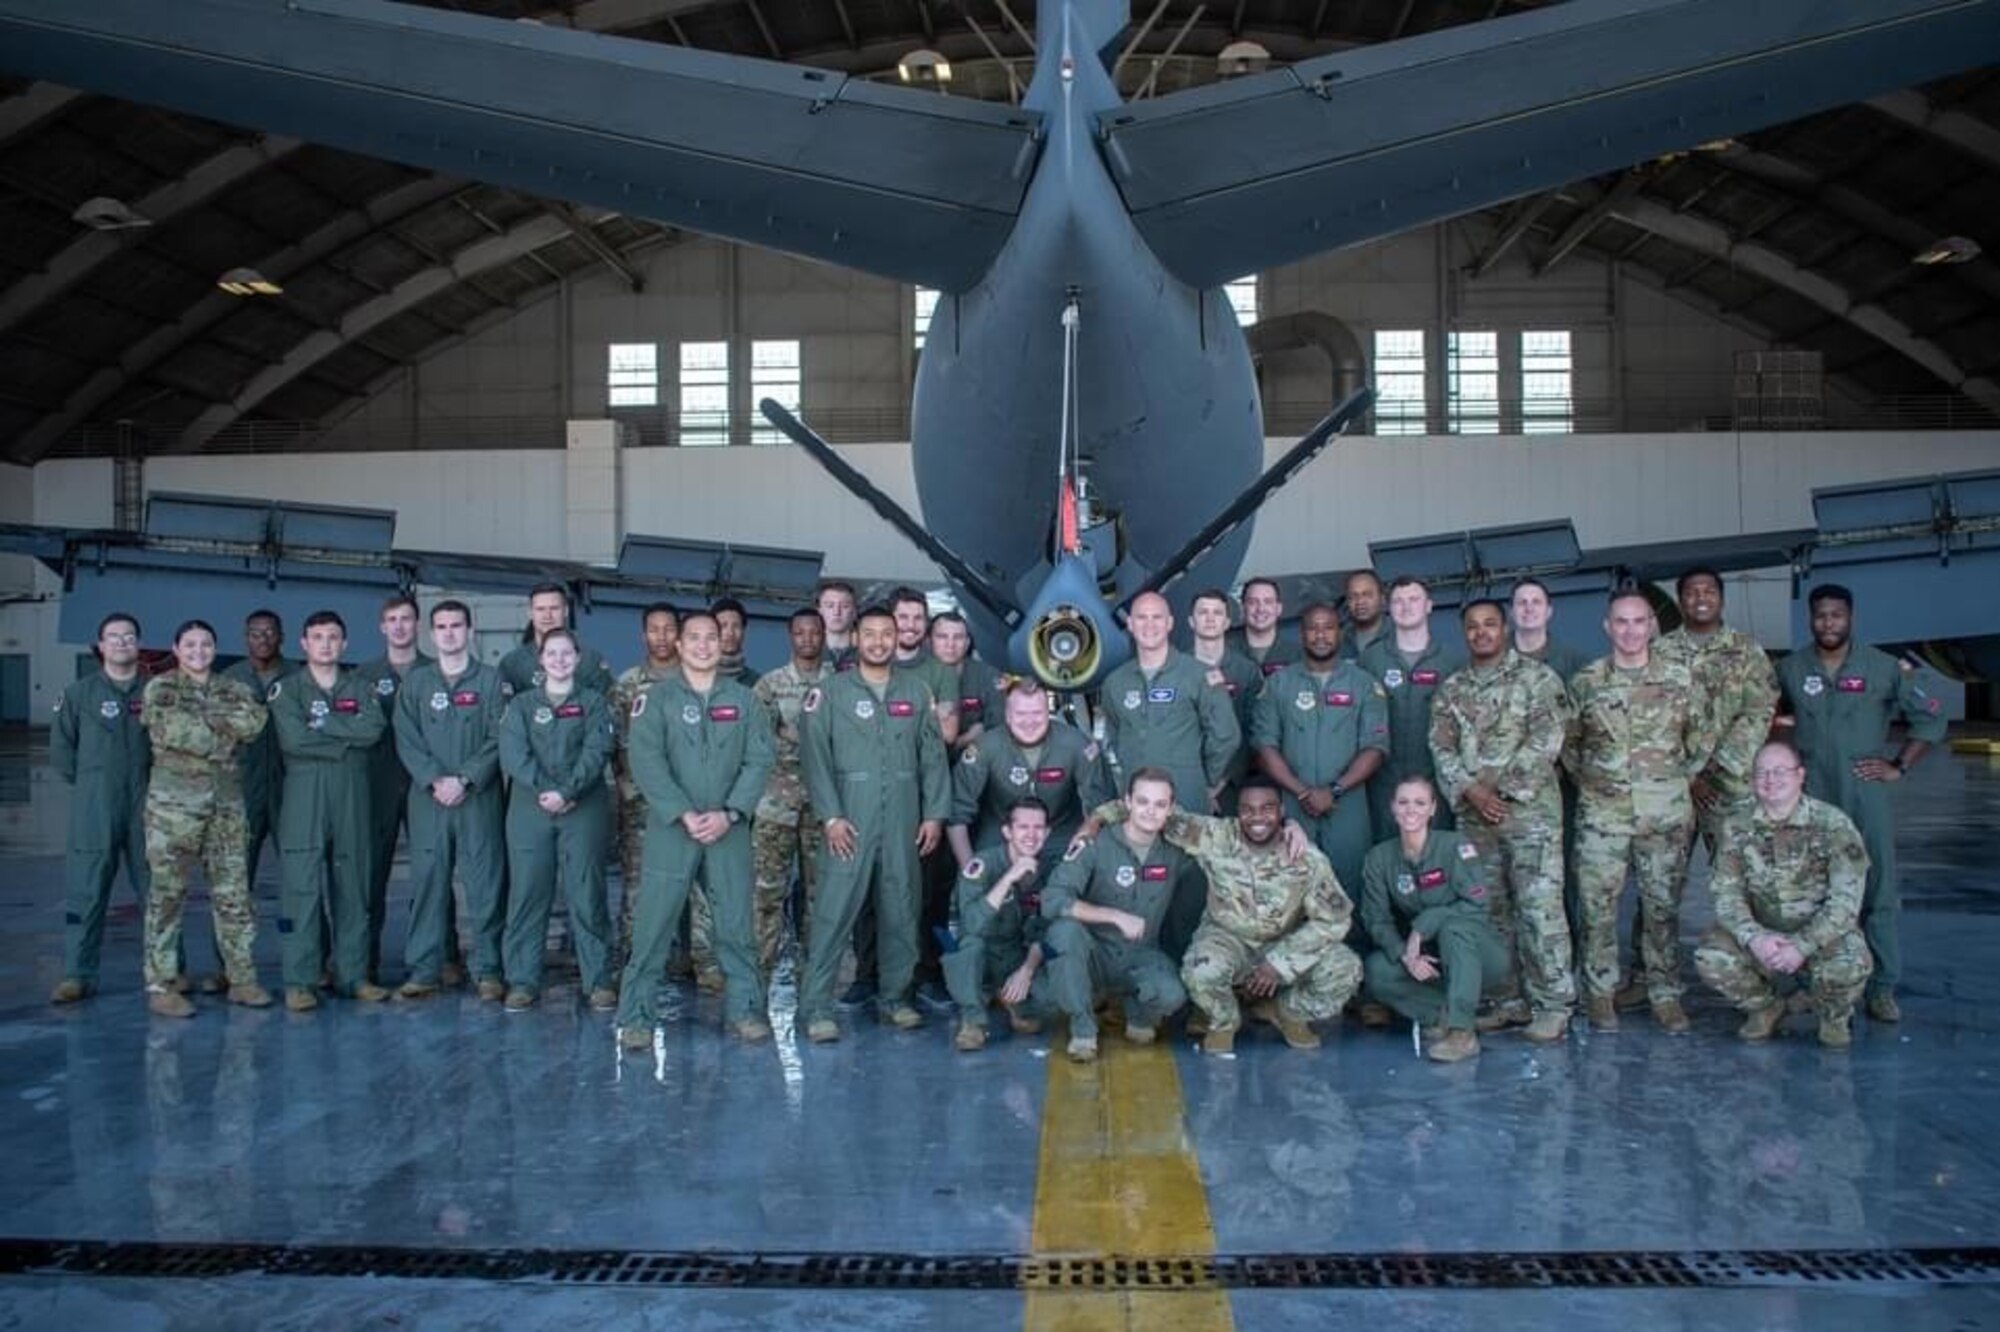 Airmen from the 50th Air Refueling Squadron (ARS) ‘Red Devils’ pose for a photograph under the boom of a KC-135 Stratotanker aircraft at MacDill Air Force Base, Florida.